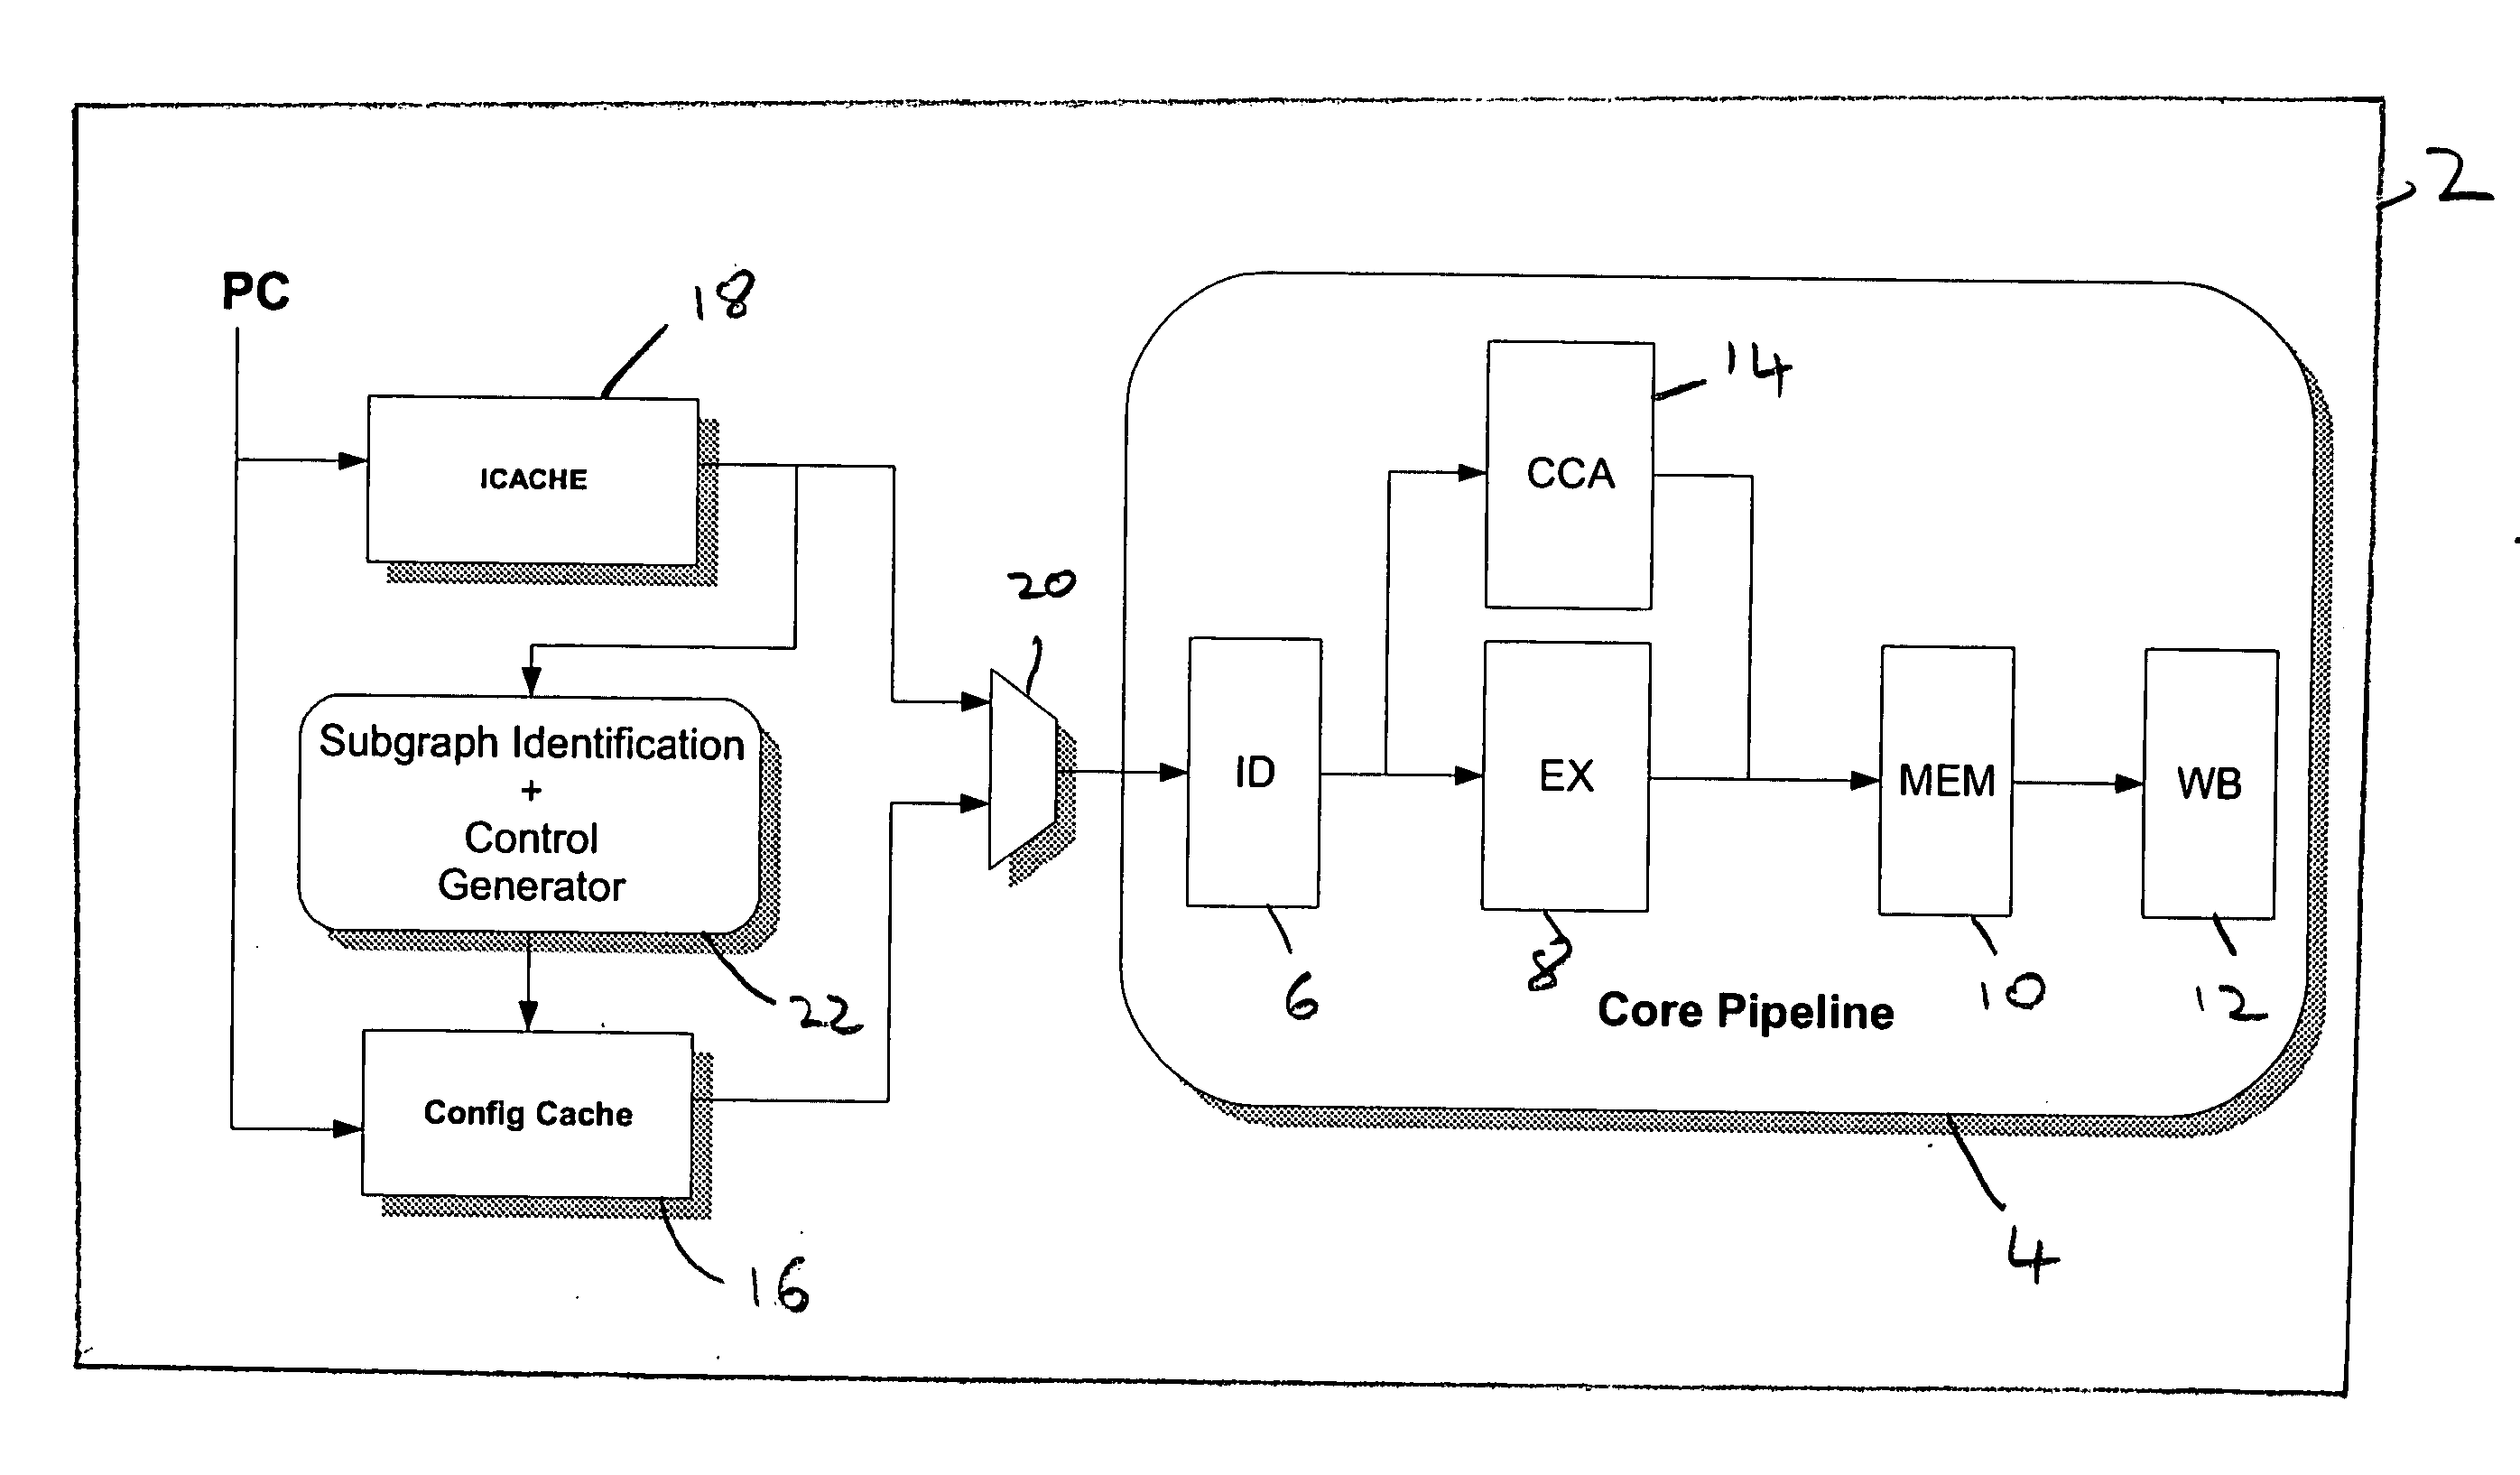 Instruction subgraph identification for a configurable accelerator